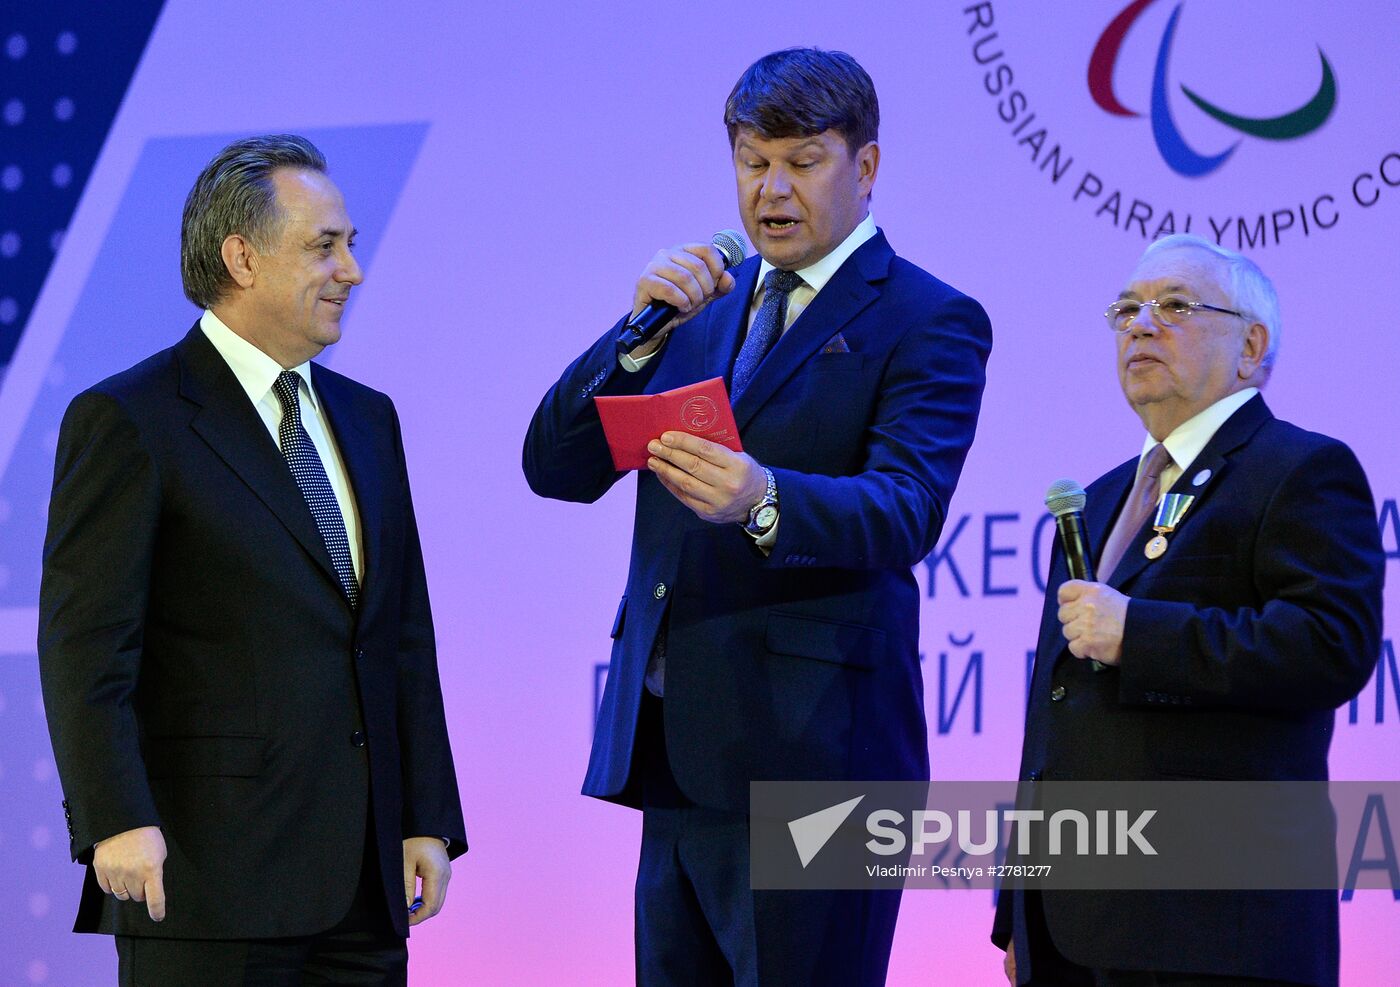 10th "Return To Life" Award Ceremony by Russian Paralympic Committee